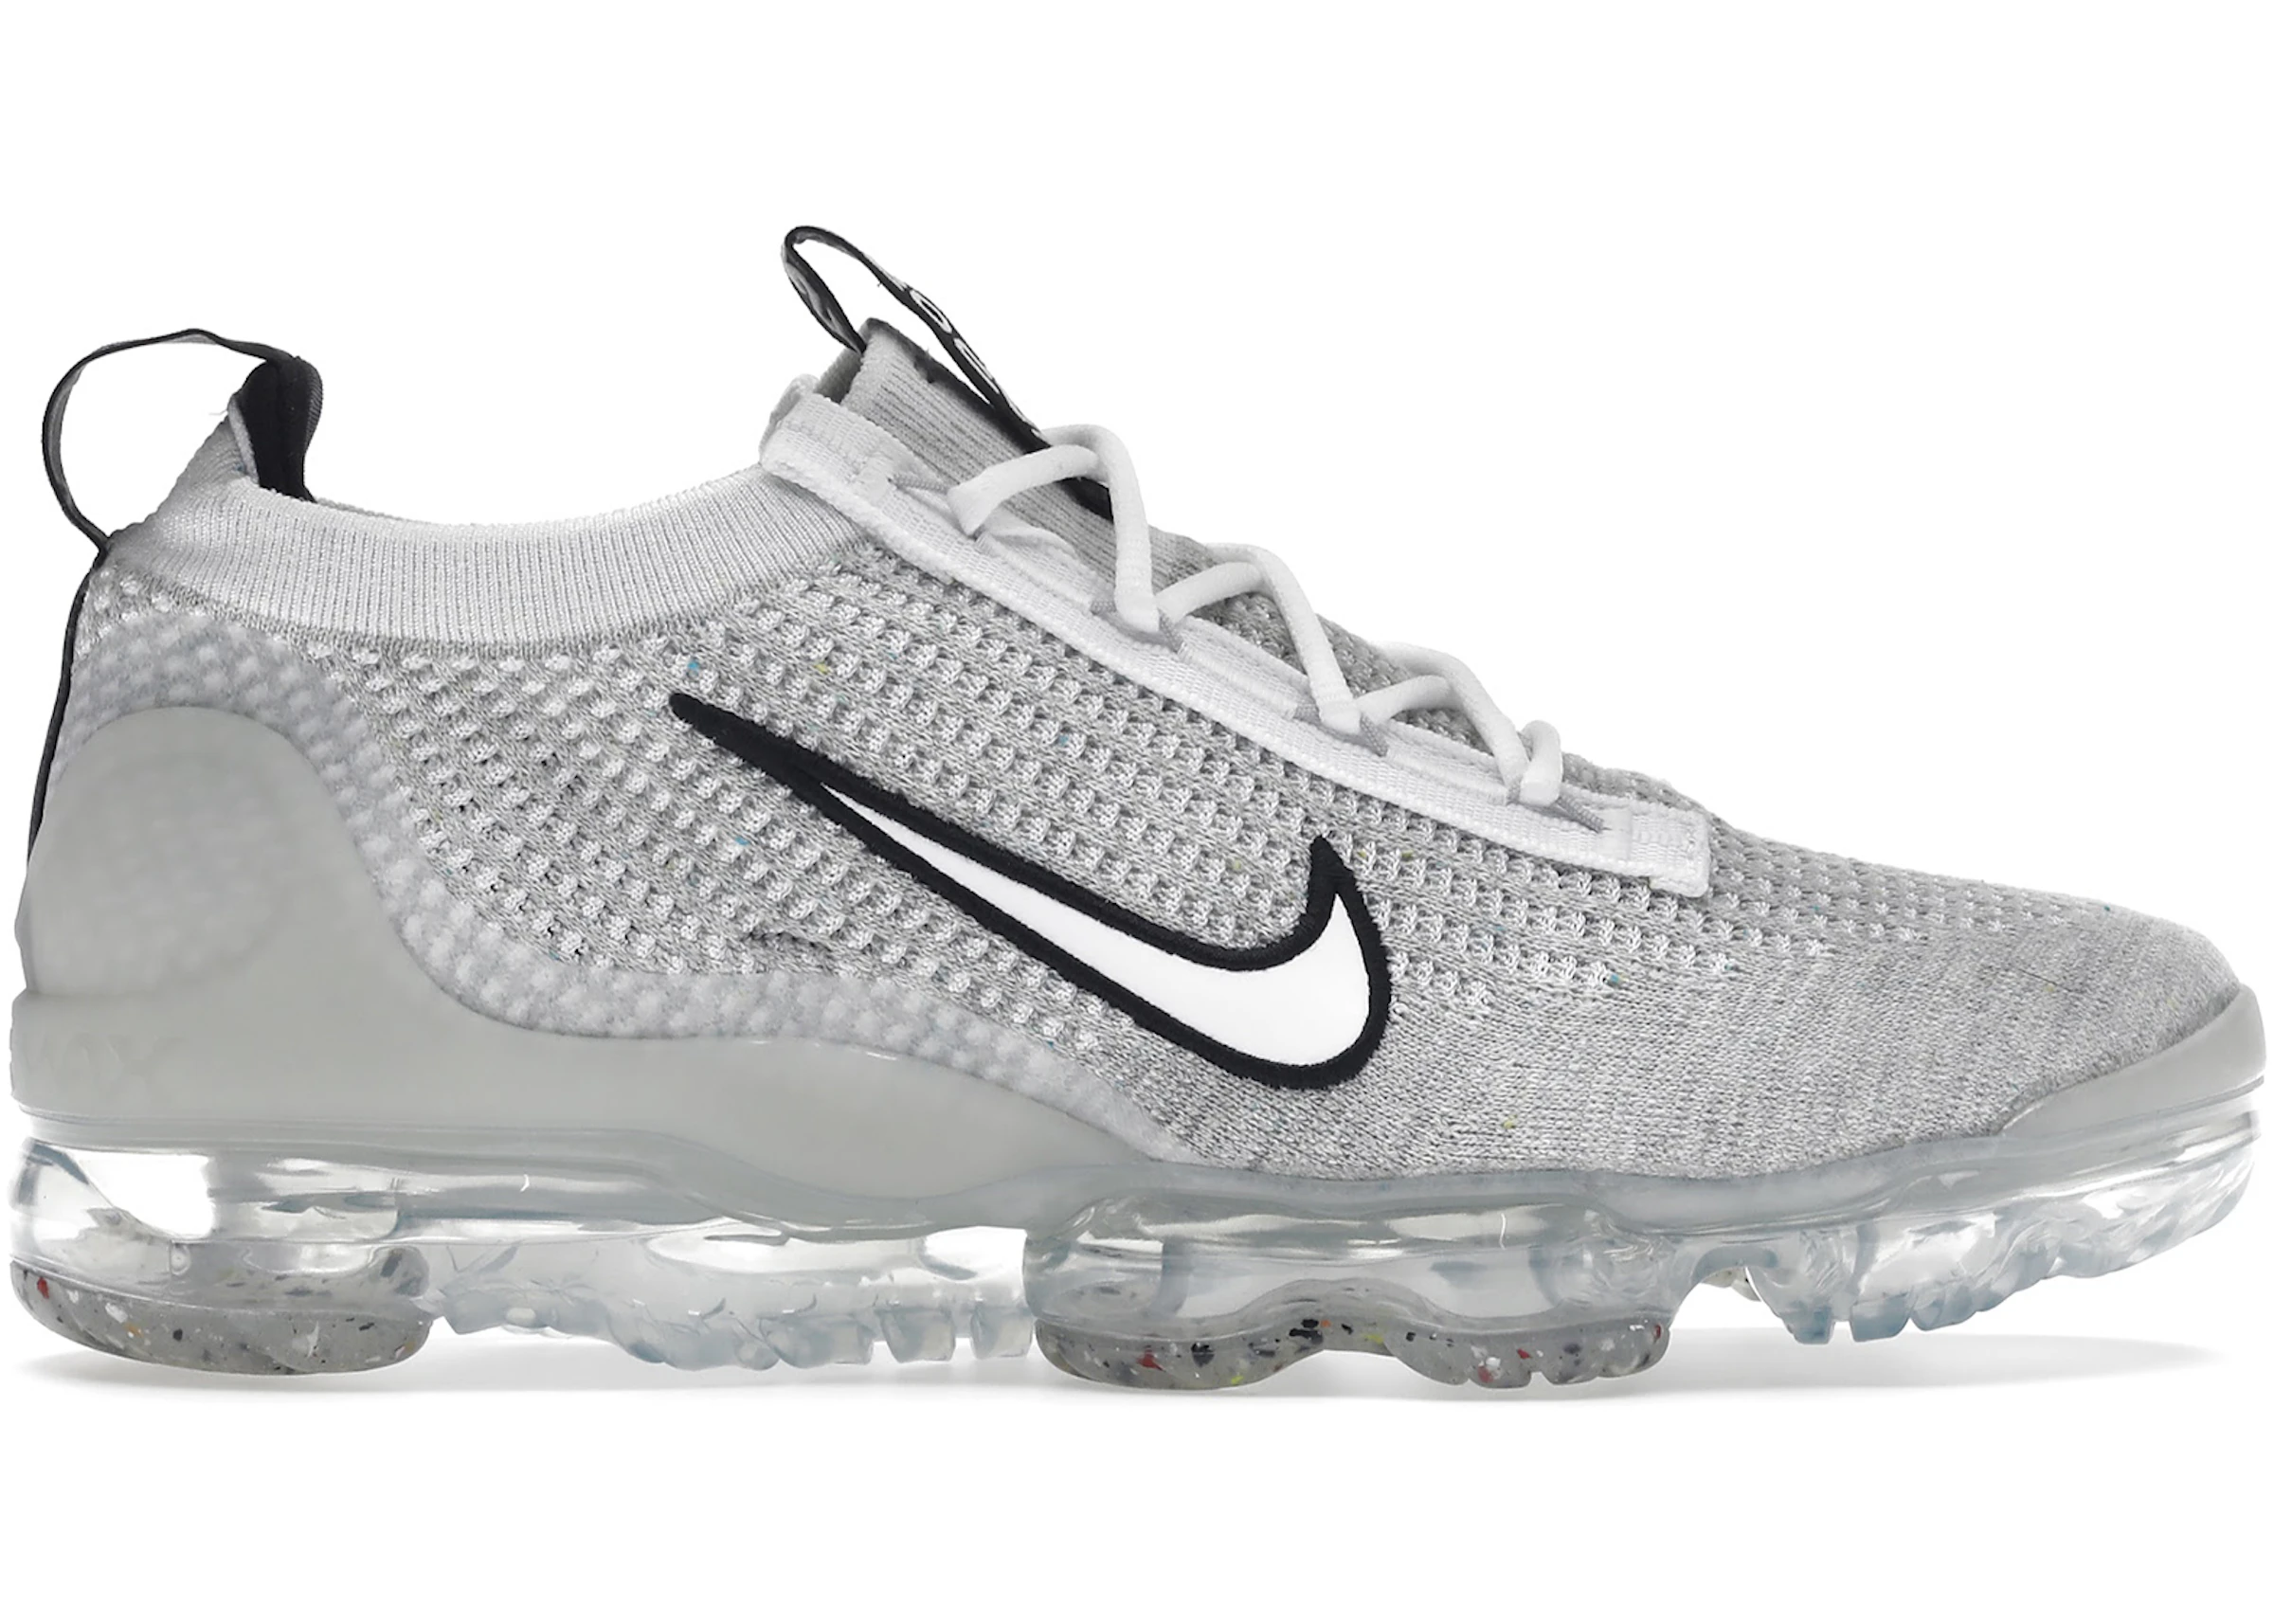 waterproof Logical chart Buy Nike Air Max VaporMax Shoes & New Sneakers - StockX